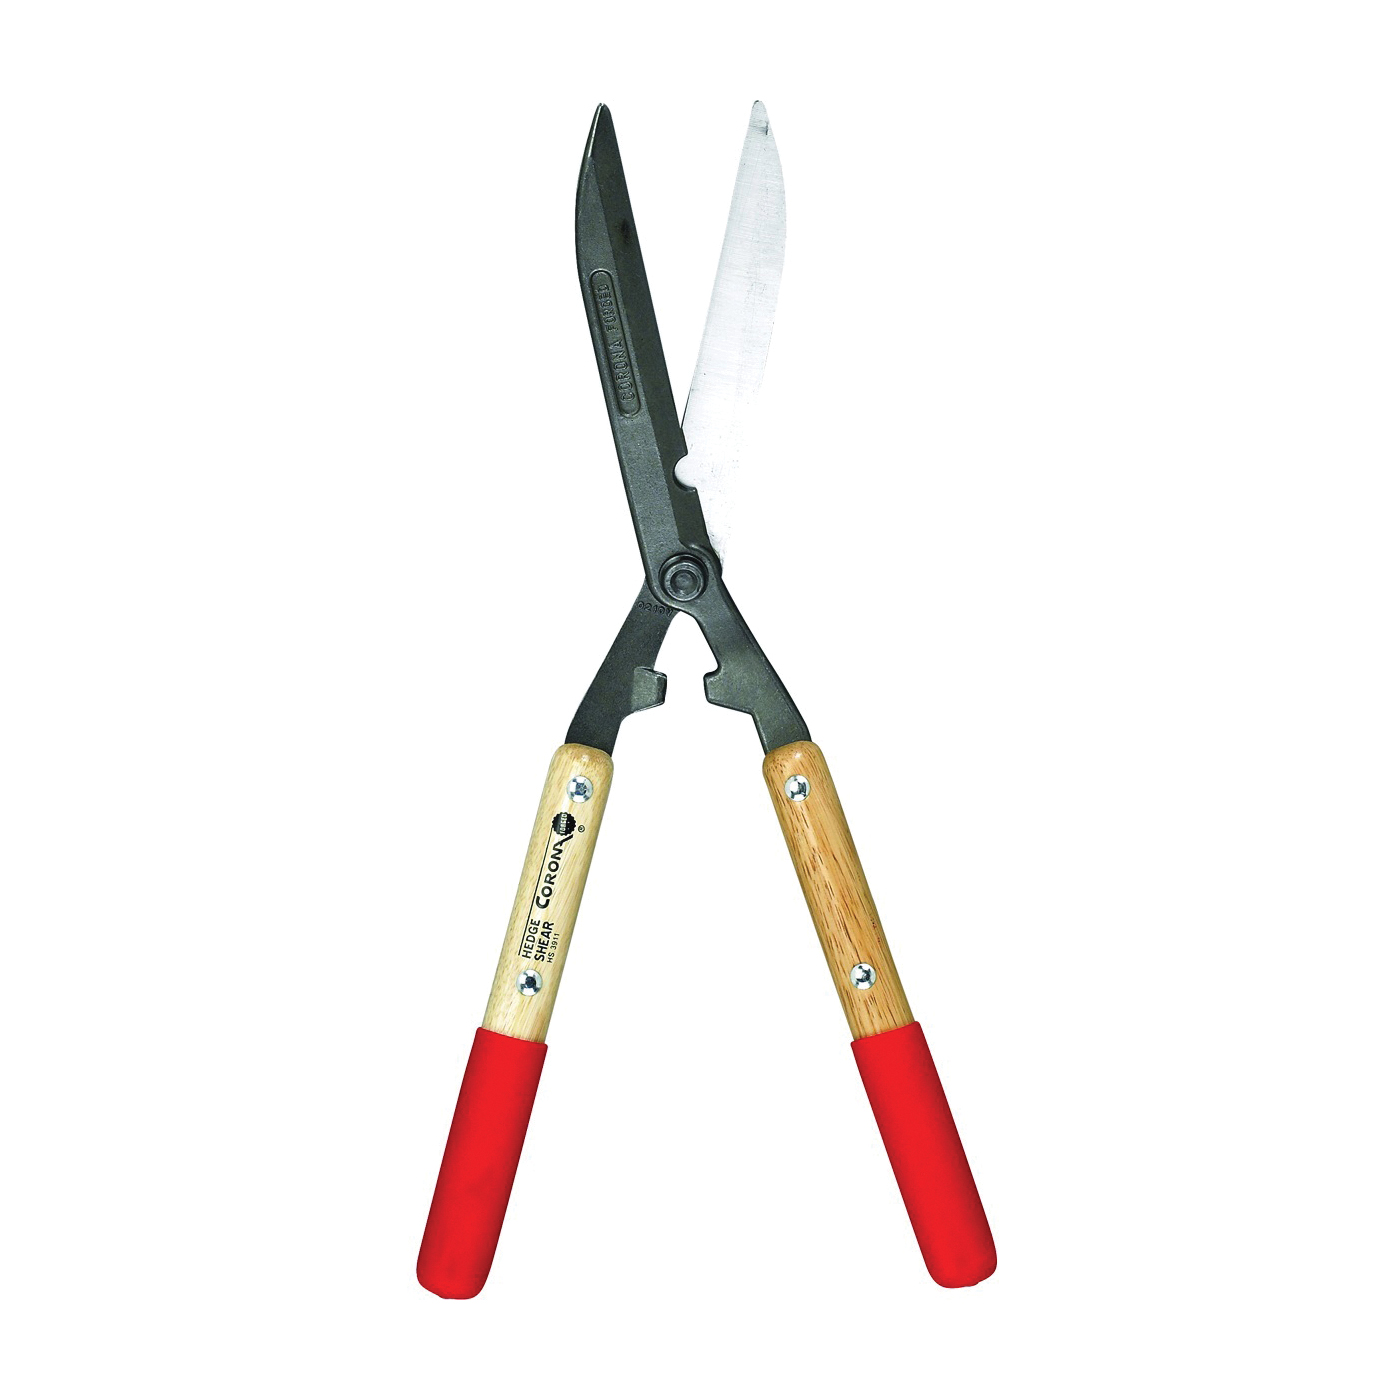 HS 3911 Hedge Shear, Straight Edge With Limb Notch Blade, 8-1/4 in L Blade, Steel Blade, Wood Handle